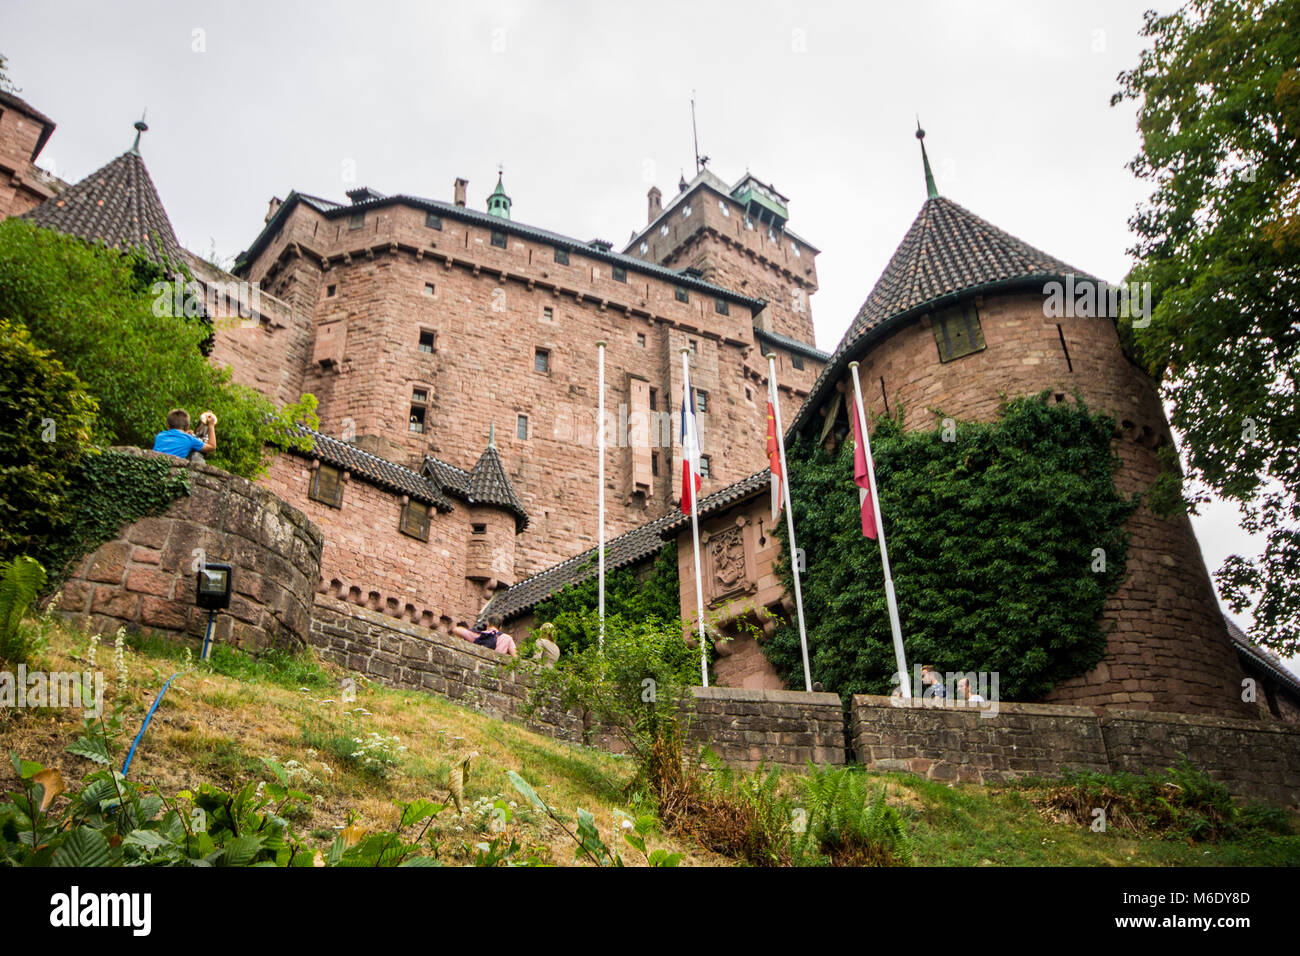 The Château du Haut-Konigsbourg, a medieval castle located Orschwiller, Bas-Rhin, Alsace, France, in the Vosges mountains just west of Sélestat Stock Photo